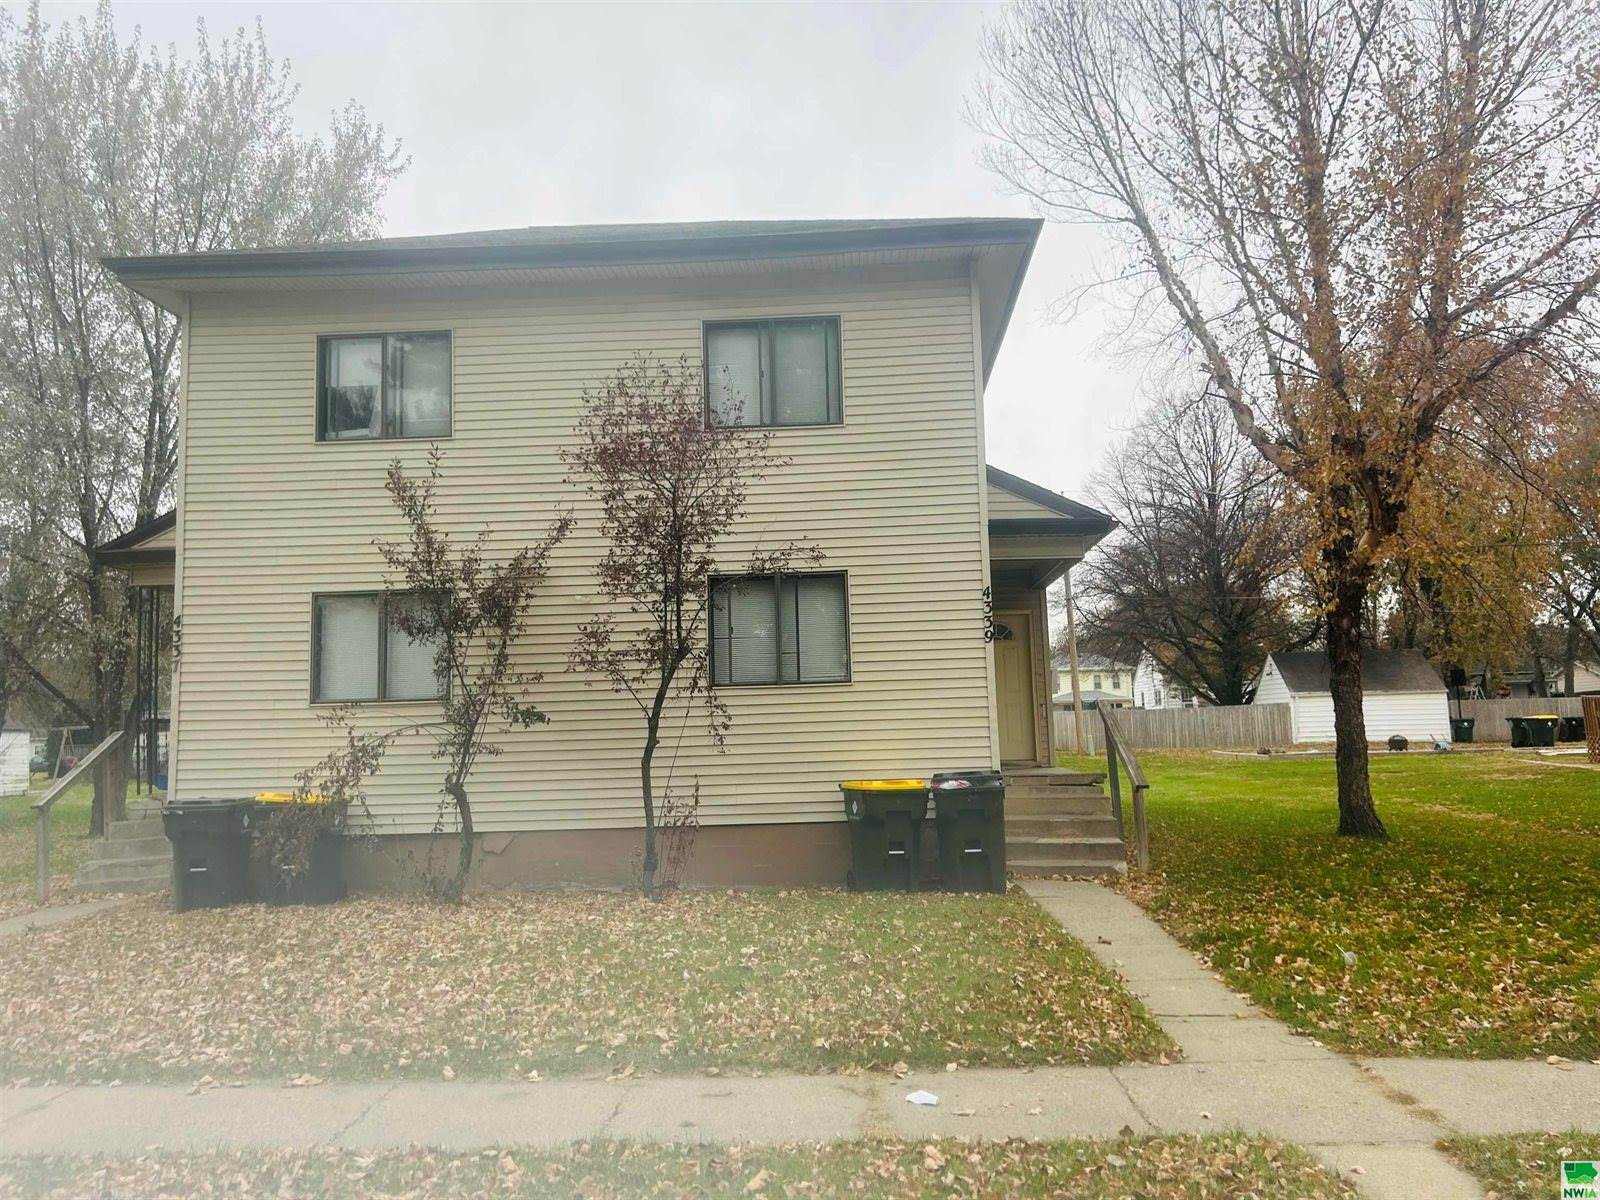 4337-39 Fillmore St., Sioux City, IA 51108